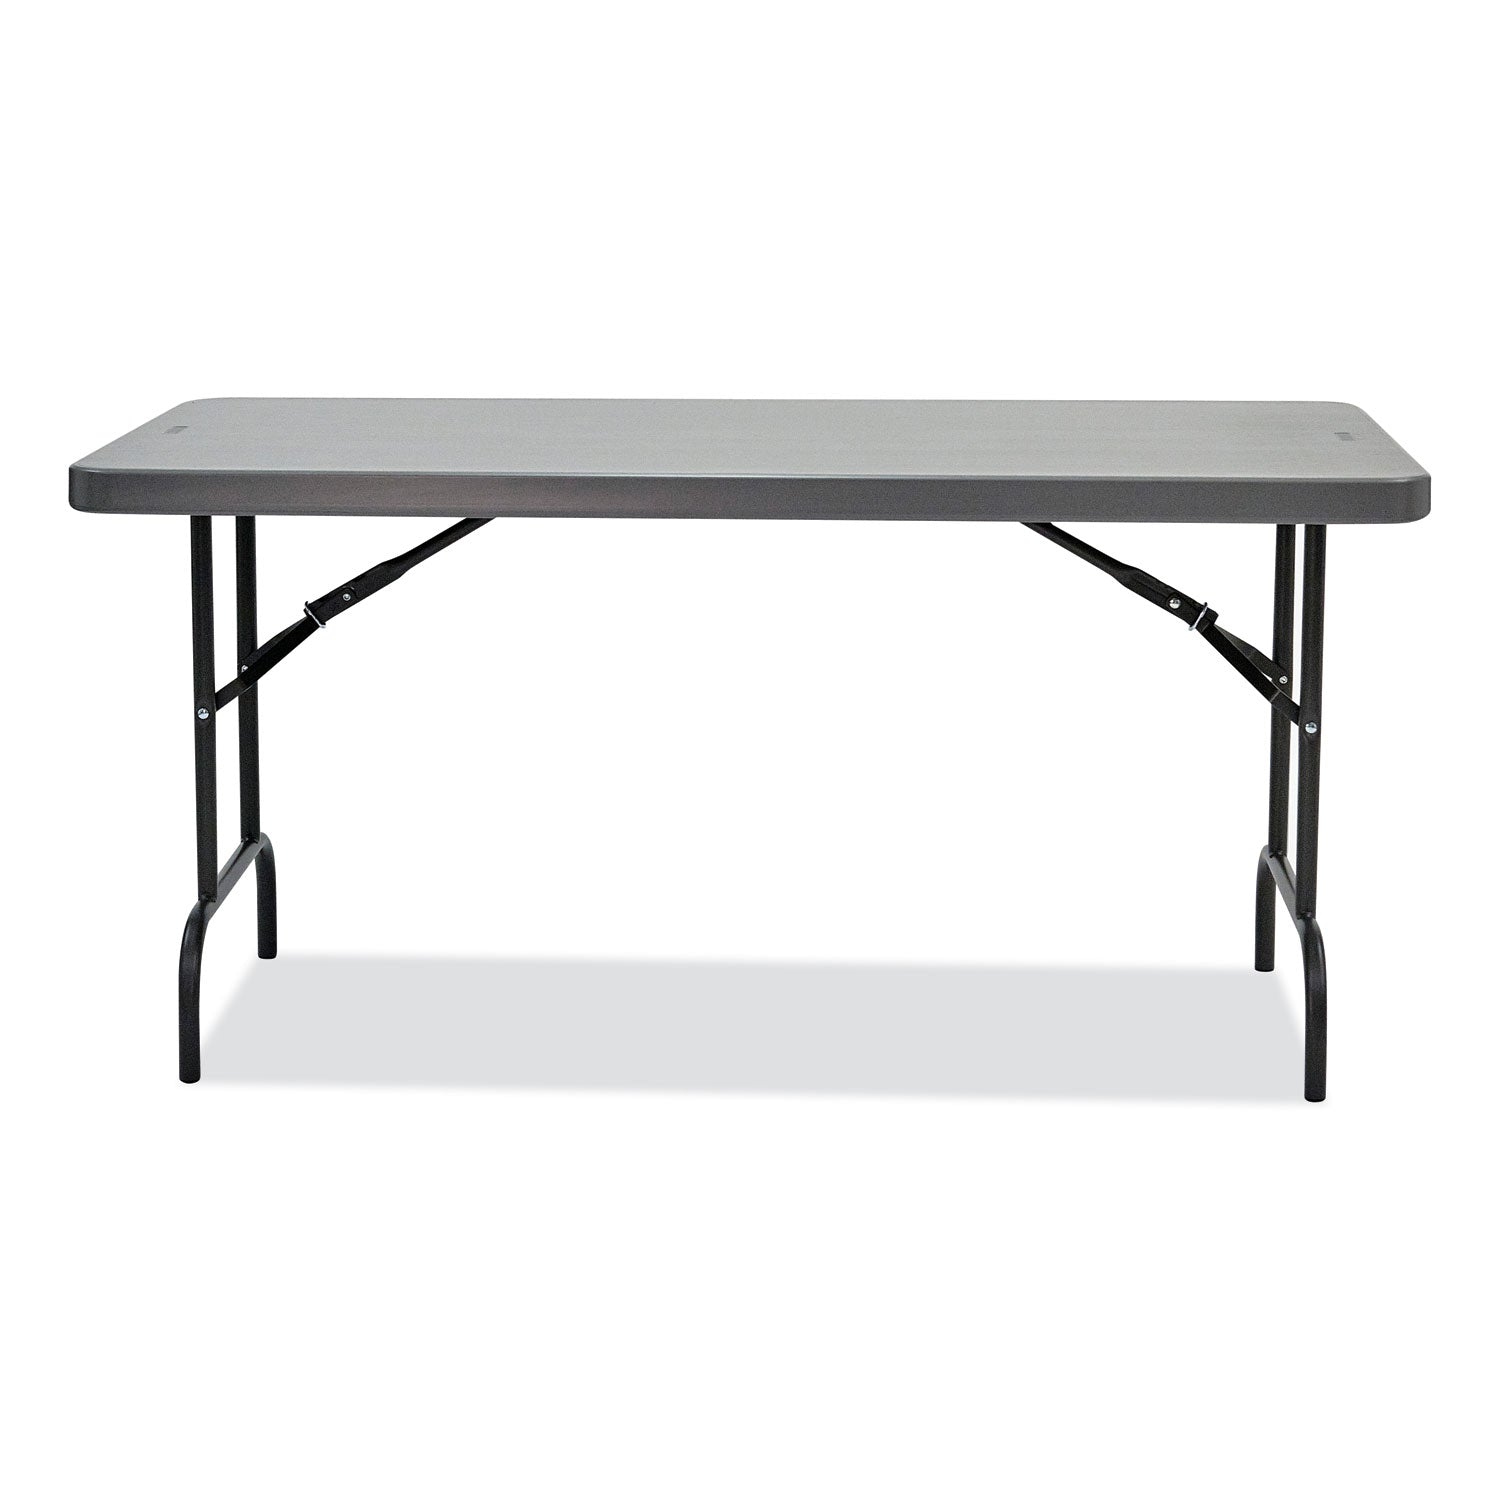 indestructable-commercial-folding-table-rectangular-60-x-30-x-29-charcoal-top-charcoal-base-legs_ice65517 - 3